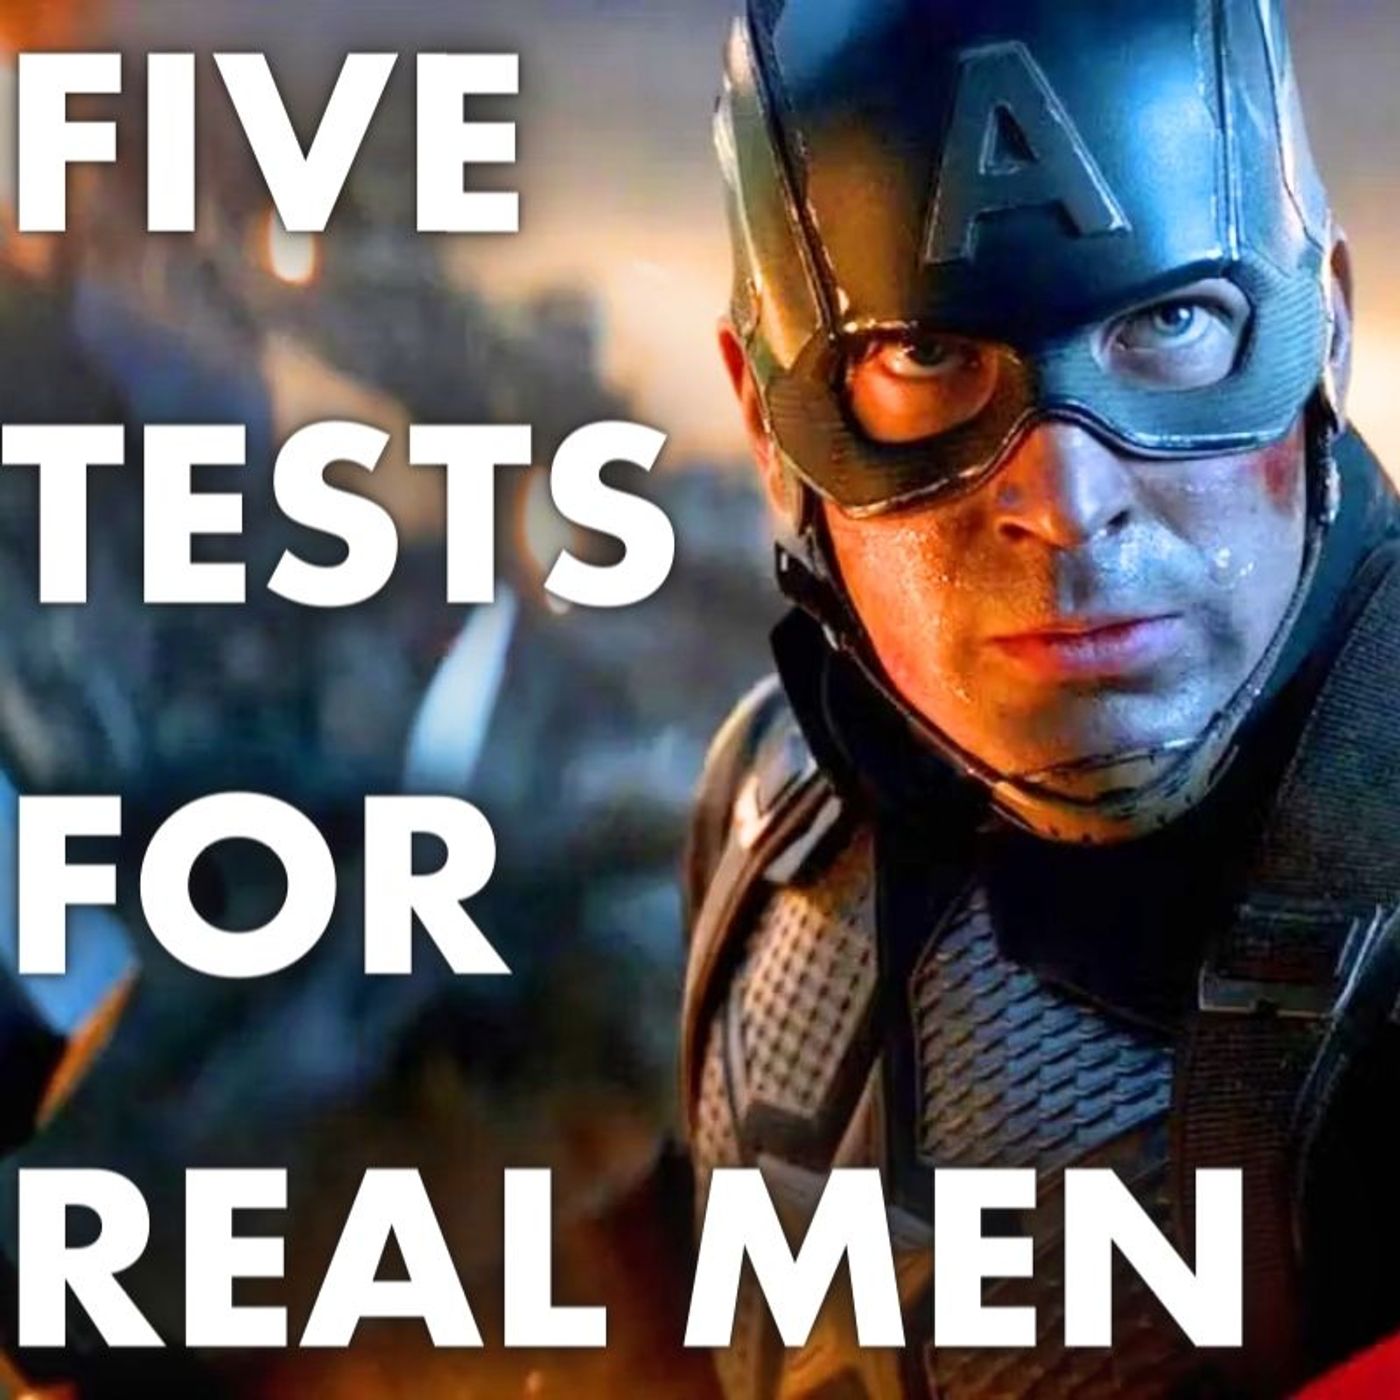 5 Tests Real Men Must Pass